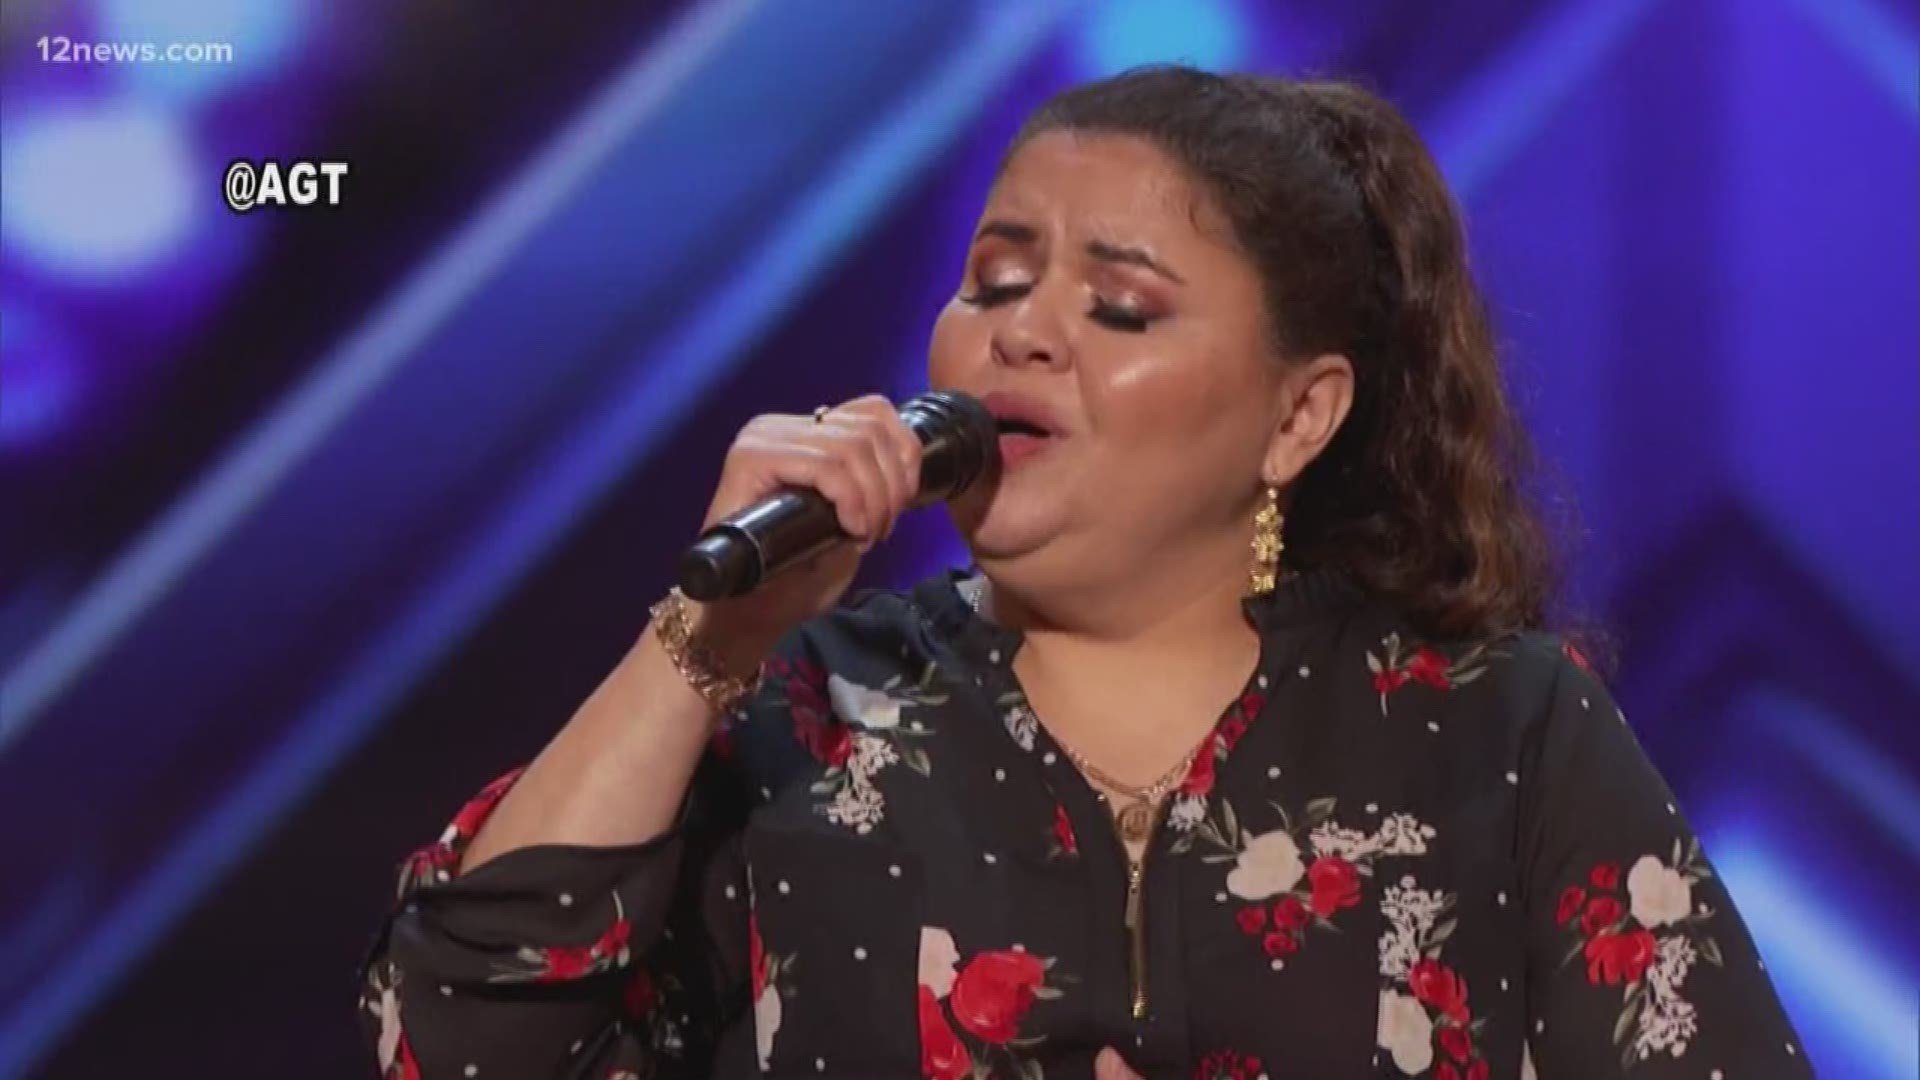 She never gave up on her dreams and now Olivia Calderon is on Tuesday's episode of "America's Got Talent". She's anxiously waiting for tonight's results to see if she'll advance to the live shows. Calderon spoke to 12 News and said she kept her dreams alive, no matter what obstacles she faced.